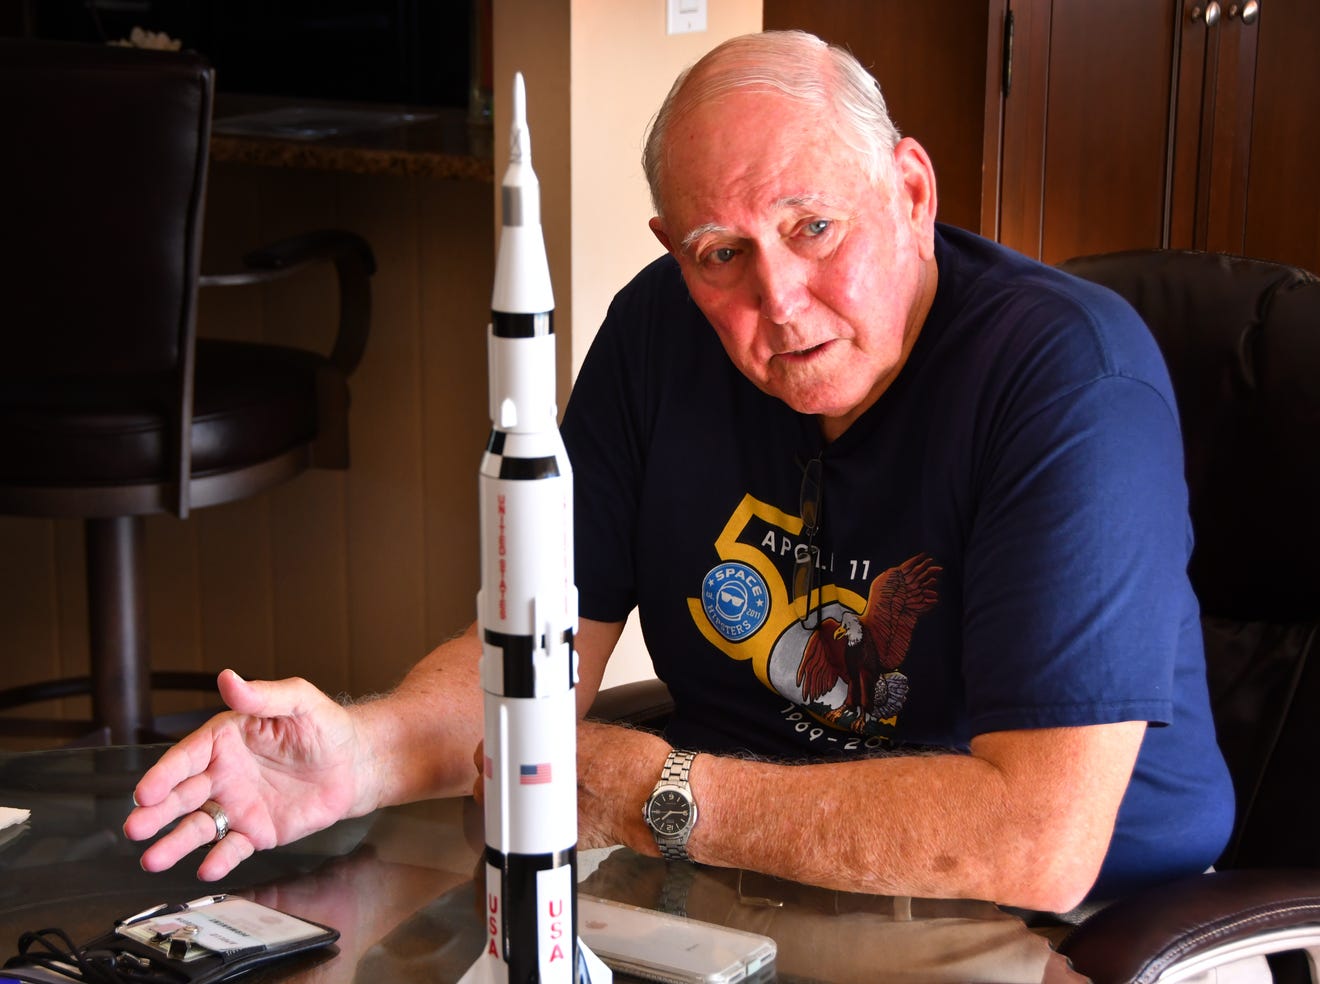 Boeing engineer Jim Ogle on effect of Apollo 11: 'We leap-frogged ahead of the Russians'